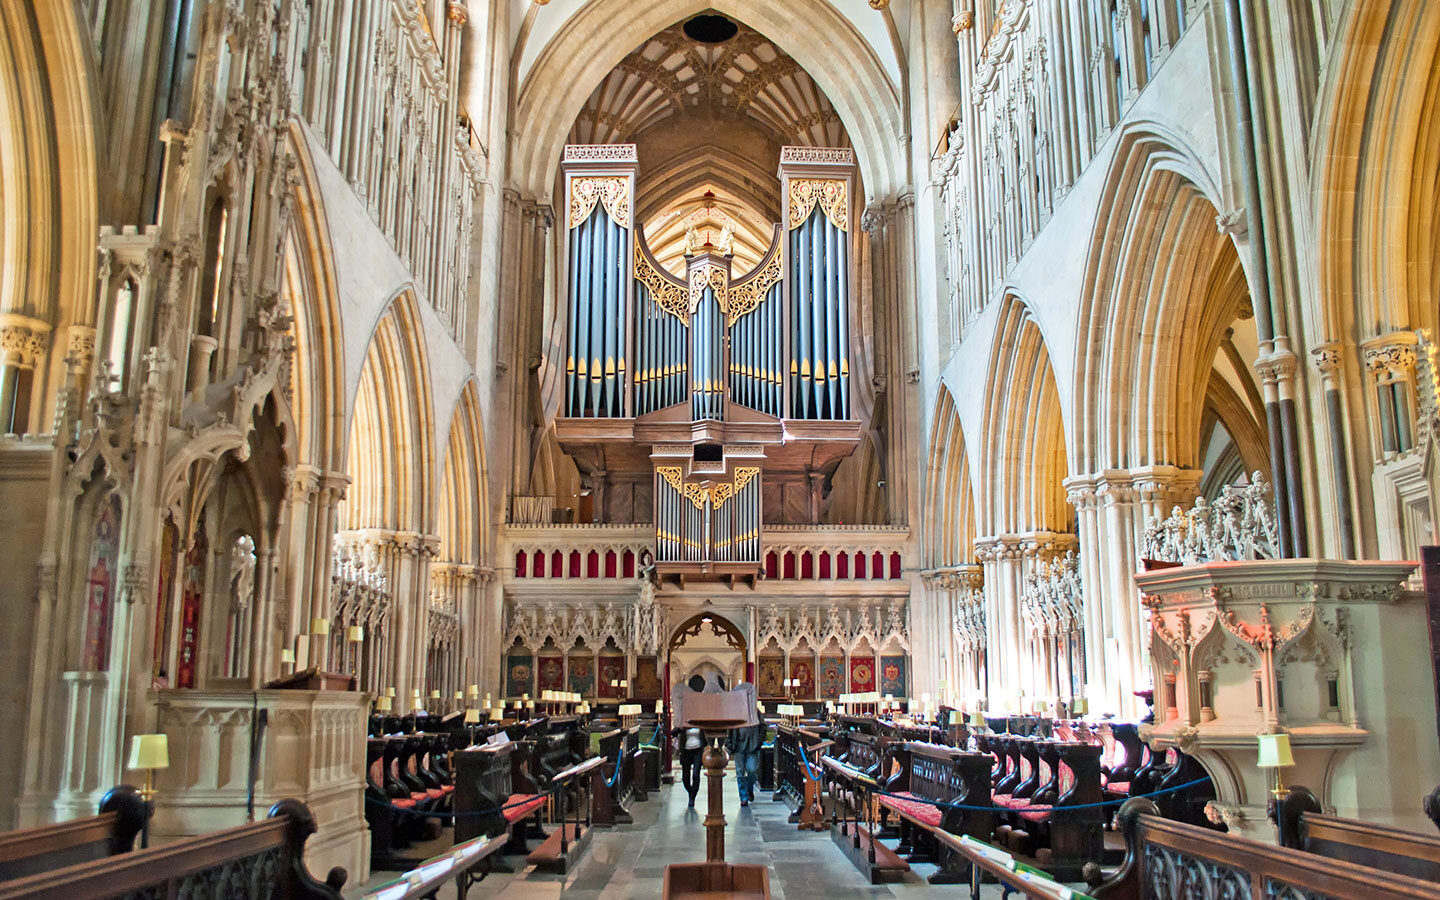 What to do in Wells: The interior of Wells Cathedral